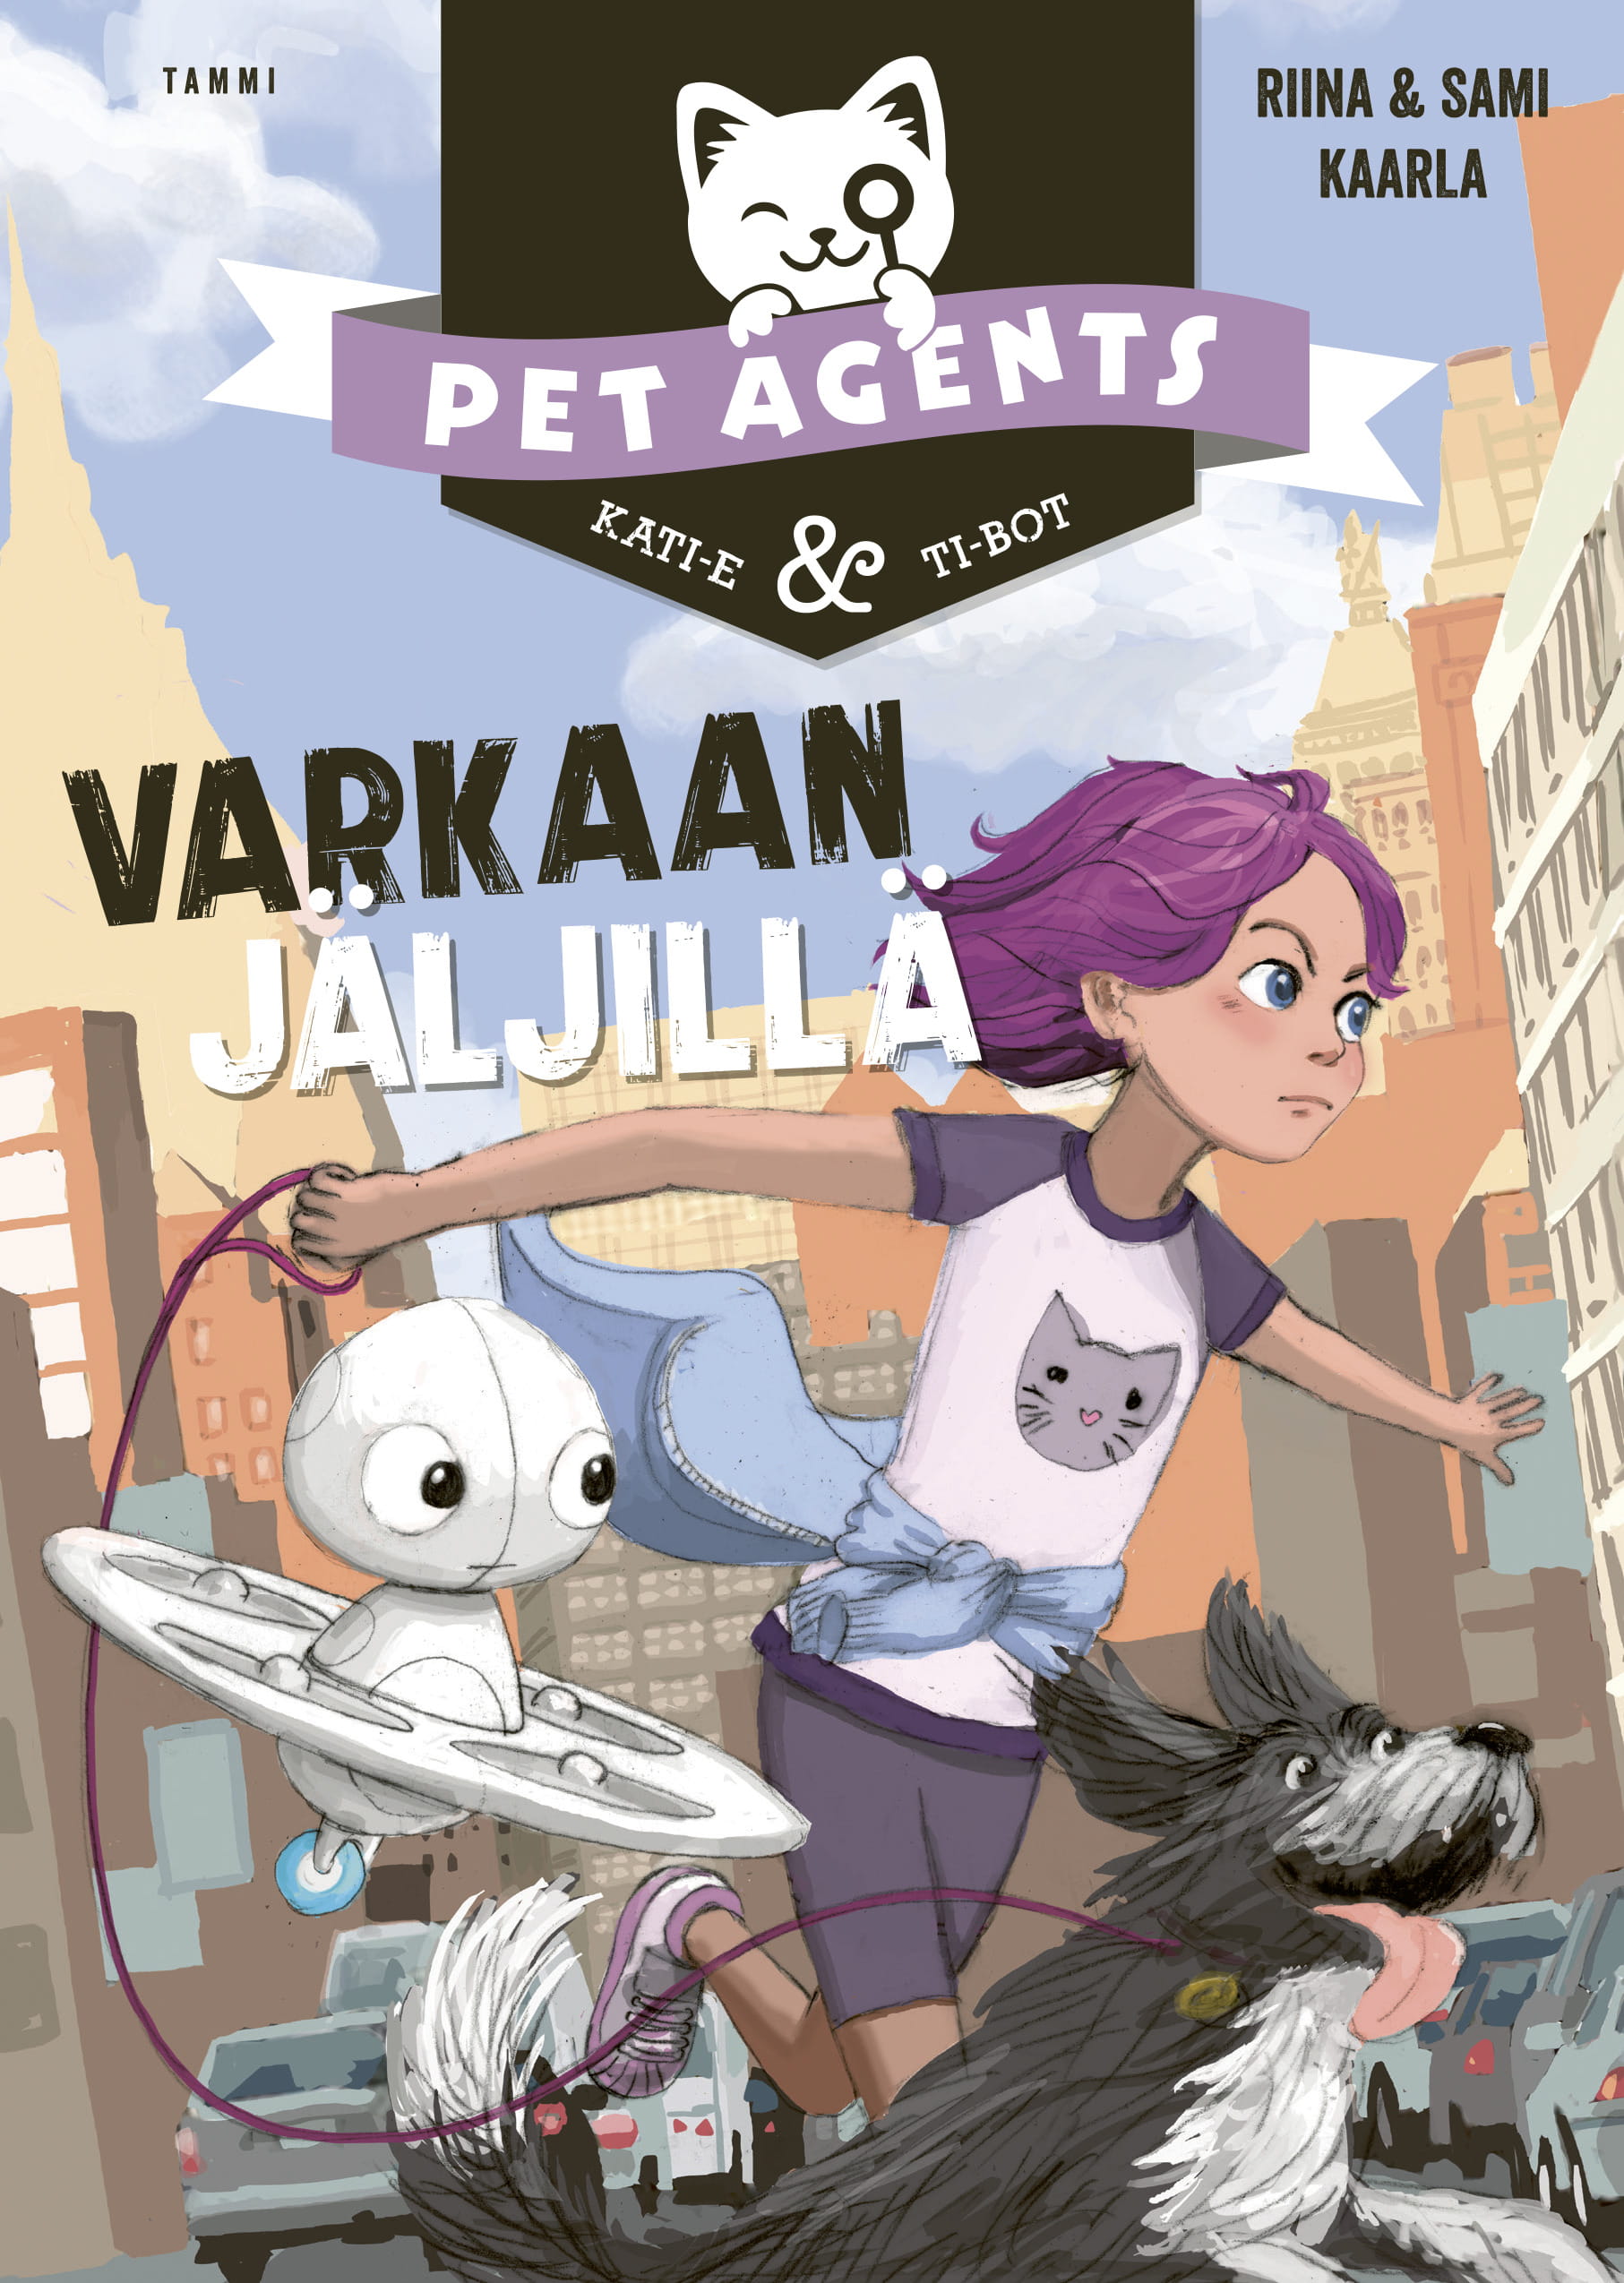 Pet Agents 2: Tracking a thief